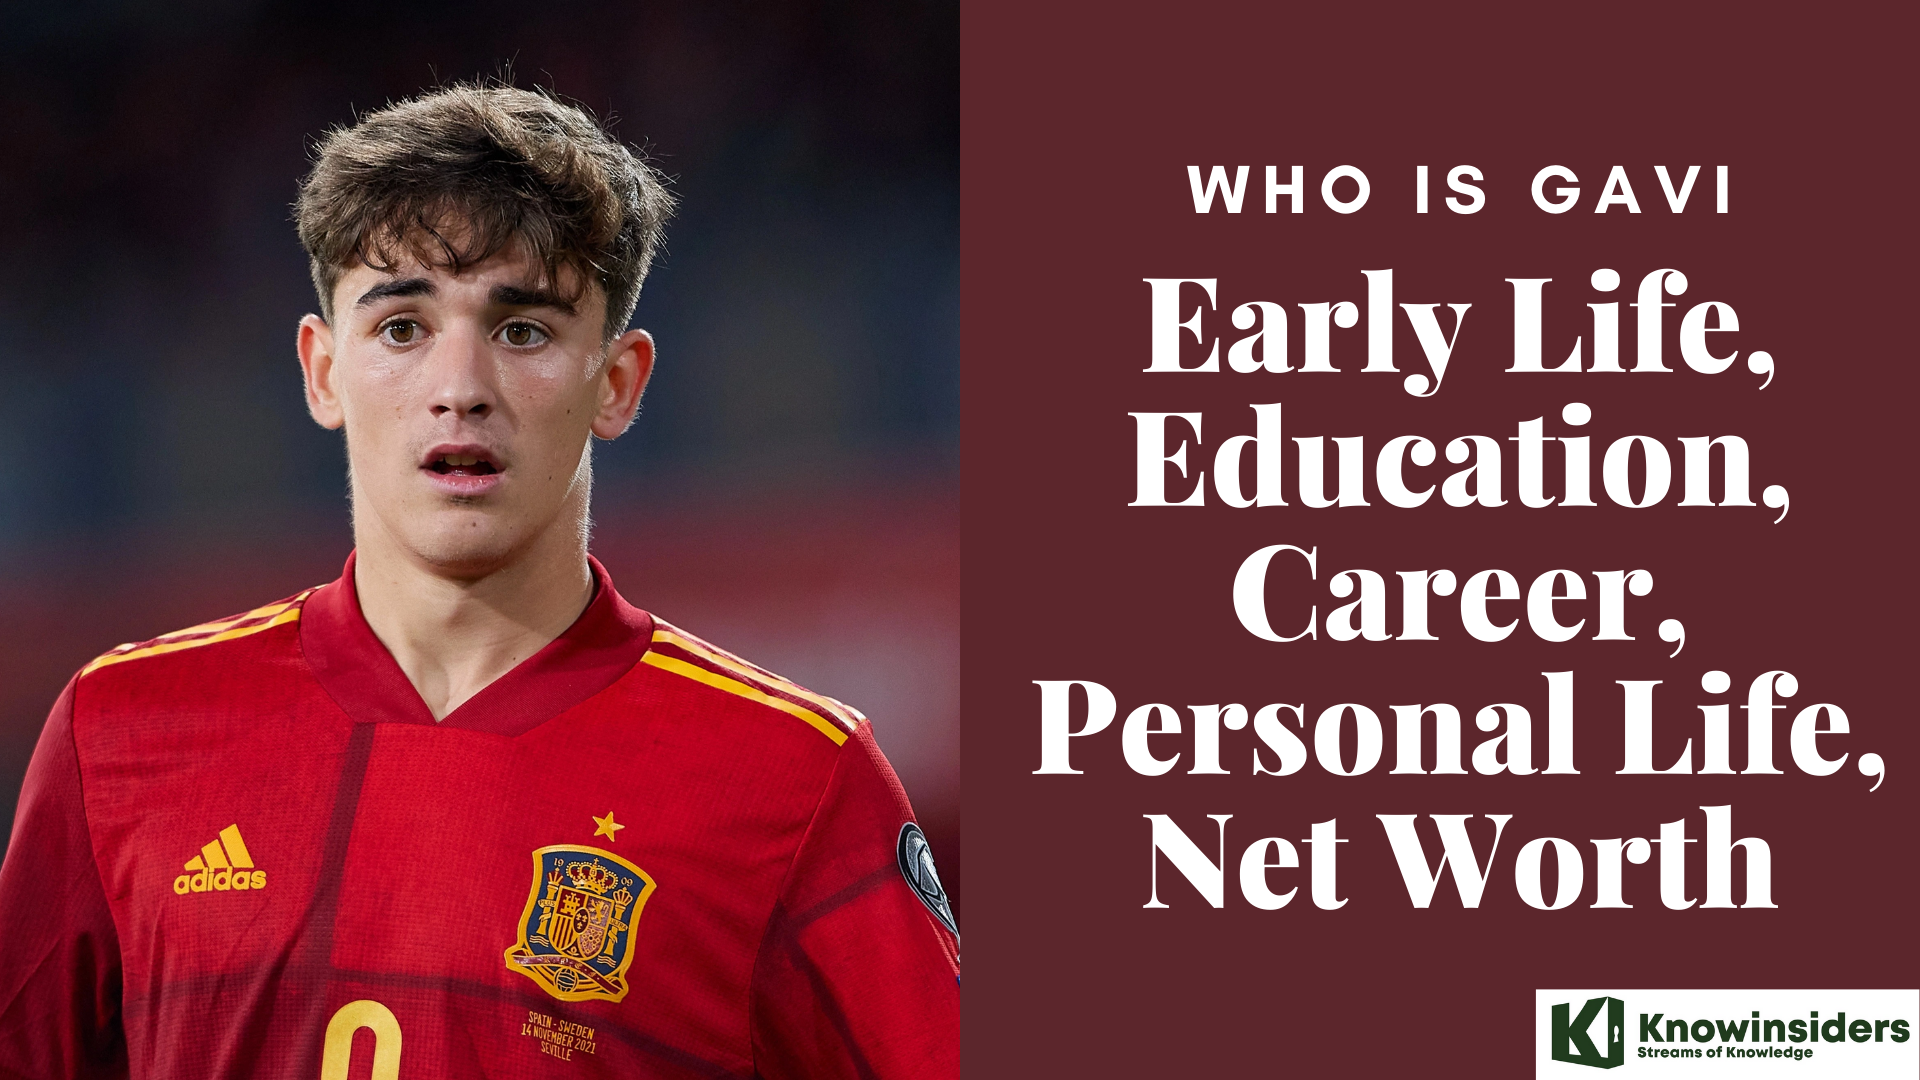 Who Is Gavi: Early Life, Education, Career, Personal Life, Net Worth